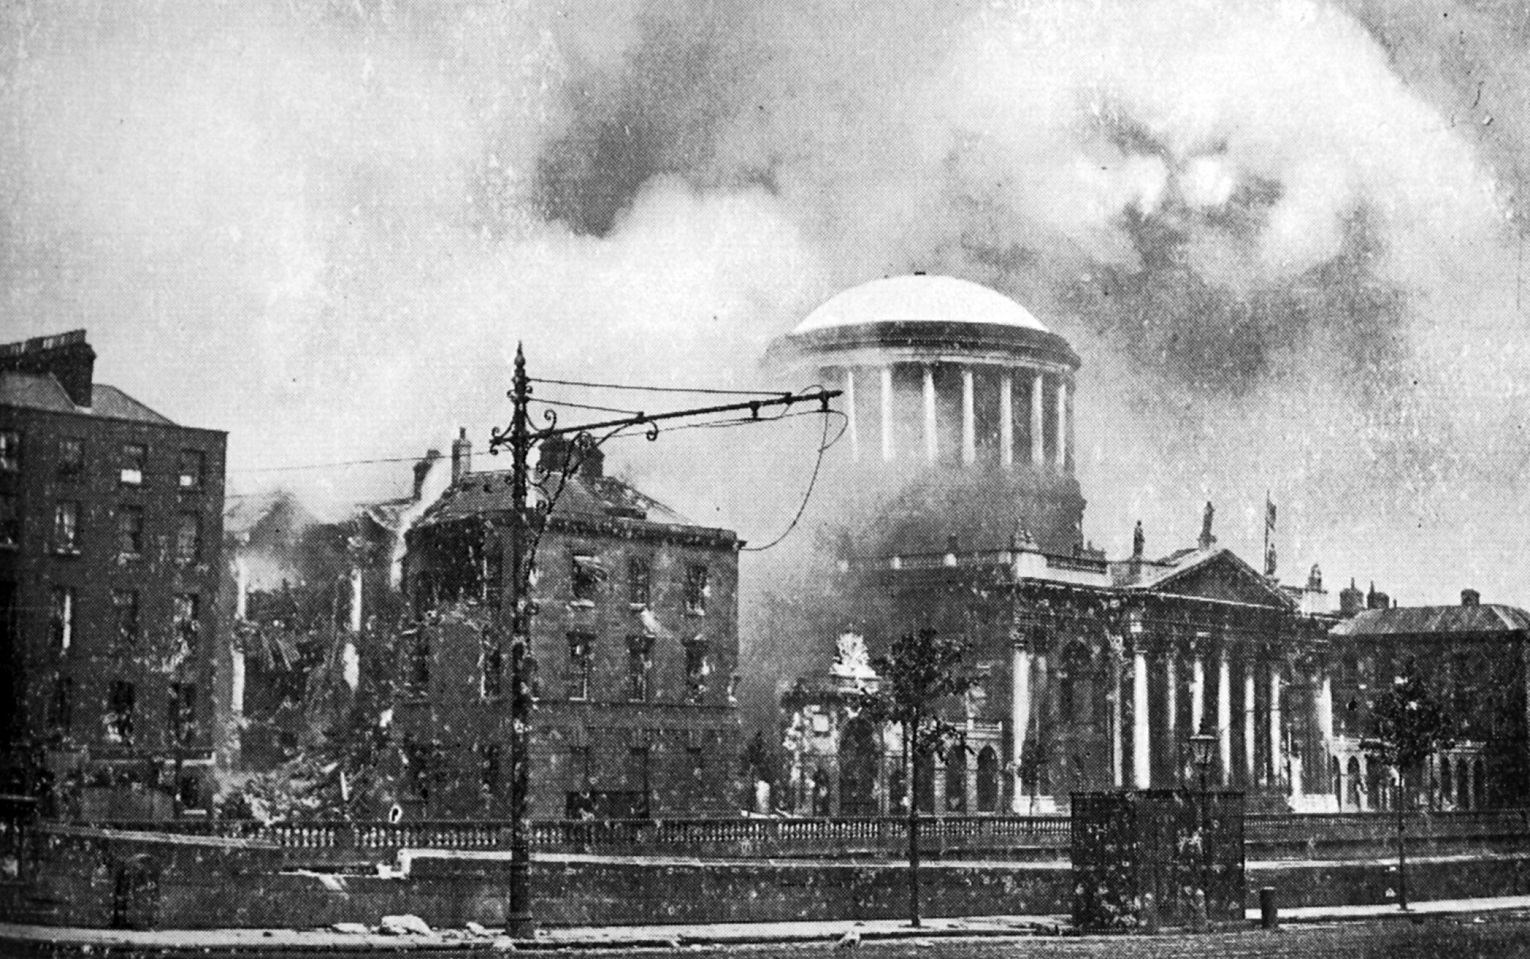 Irish Free State forces capture the Four Courts, Dublin from IRA irregulars: smoke and debris...